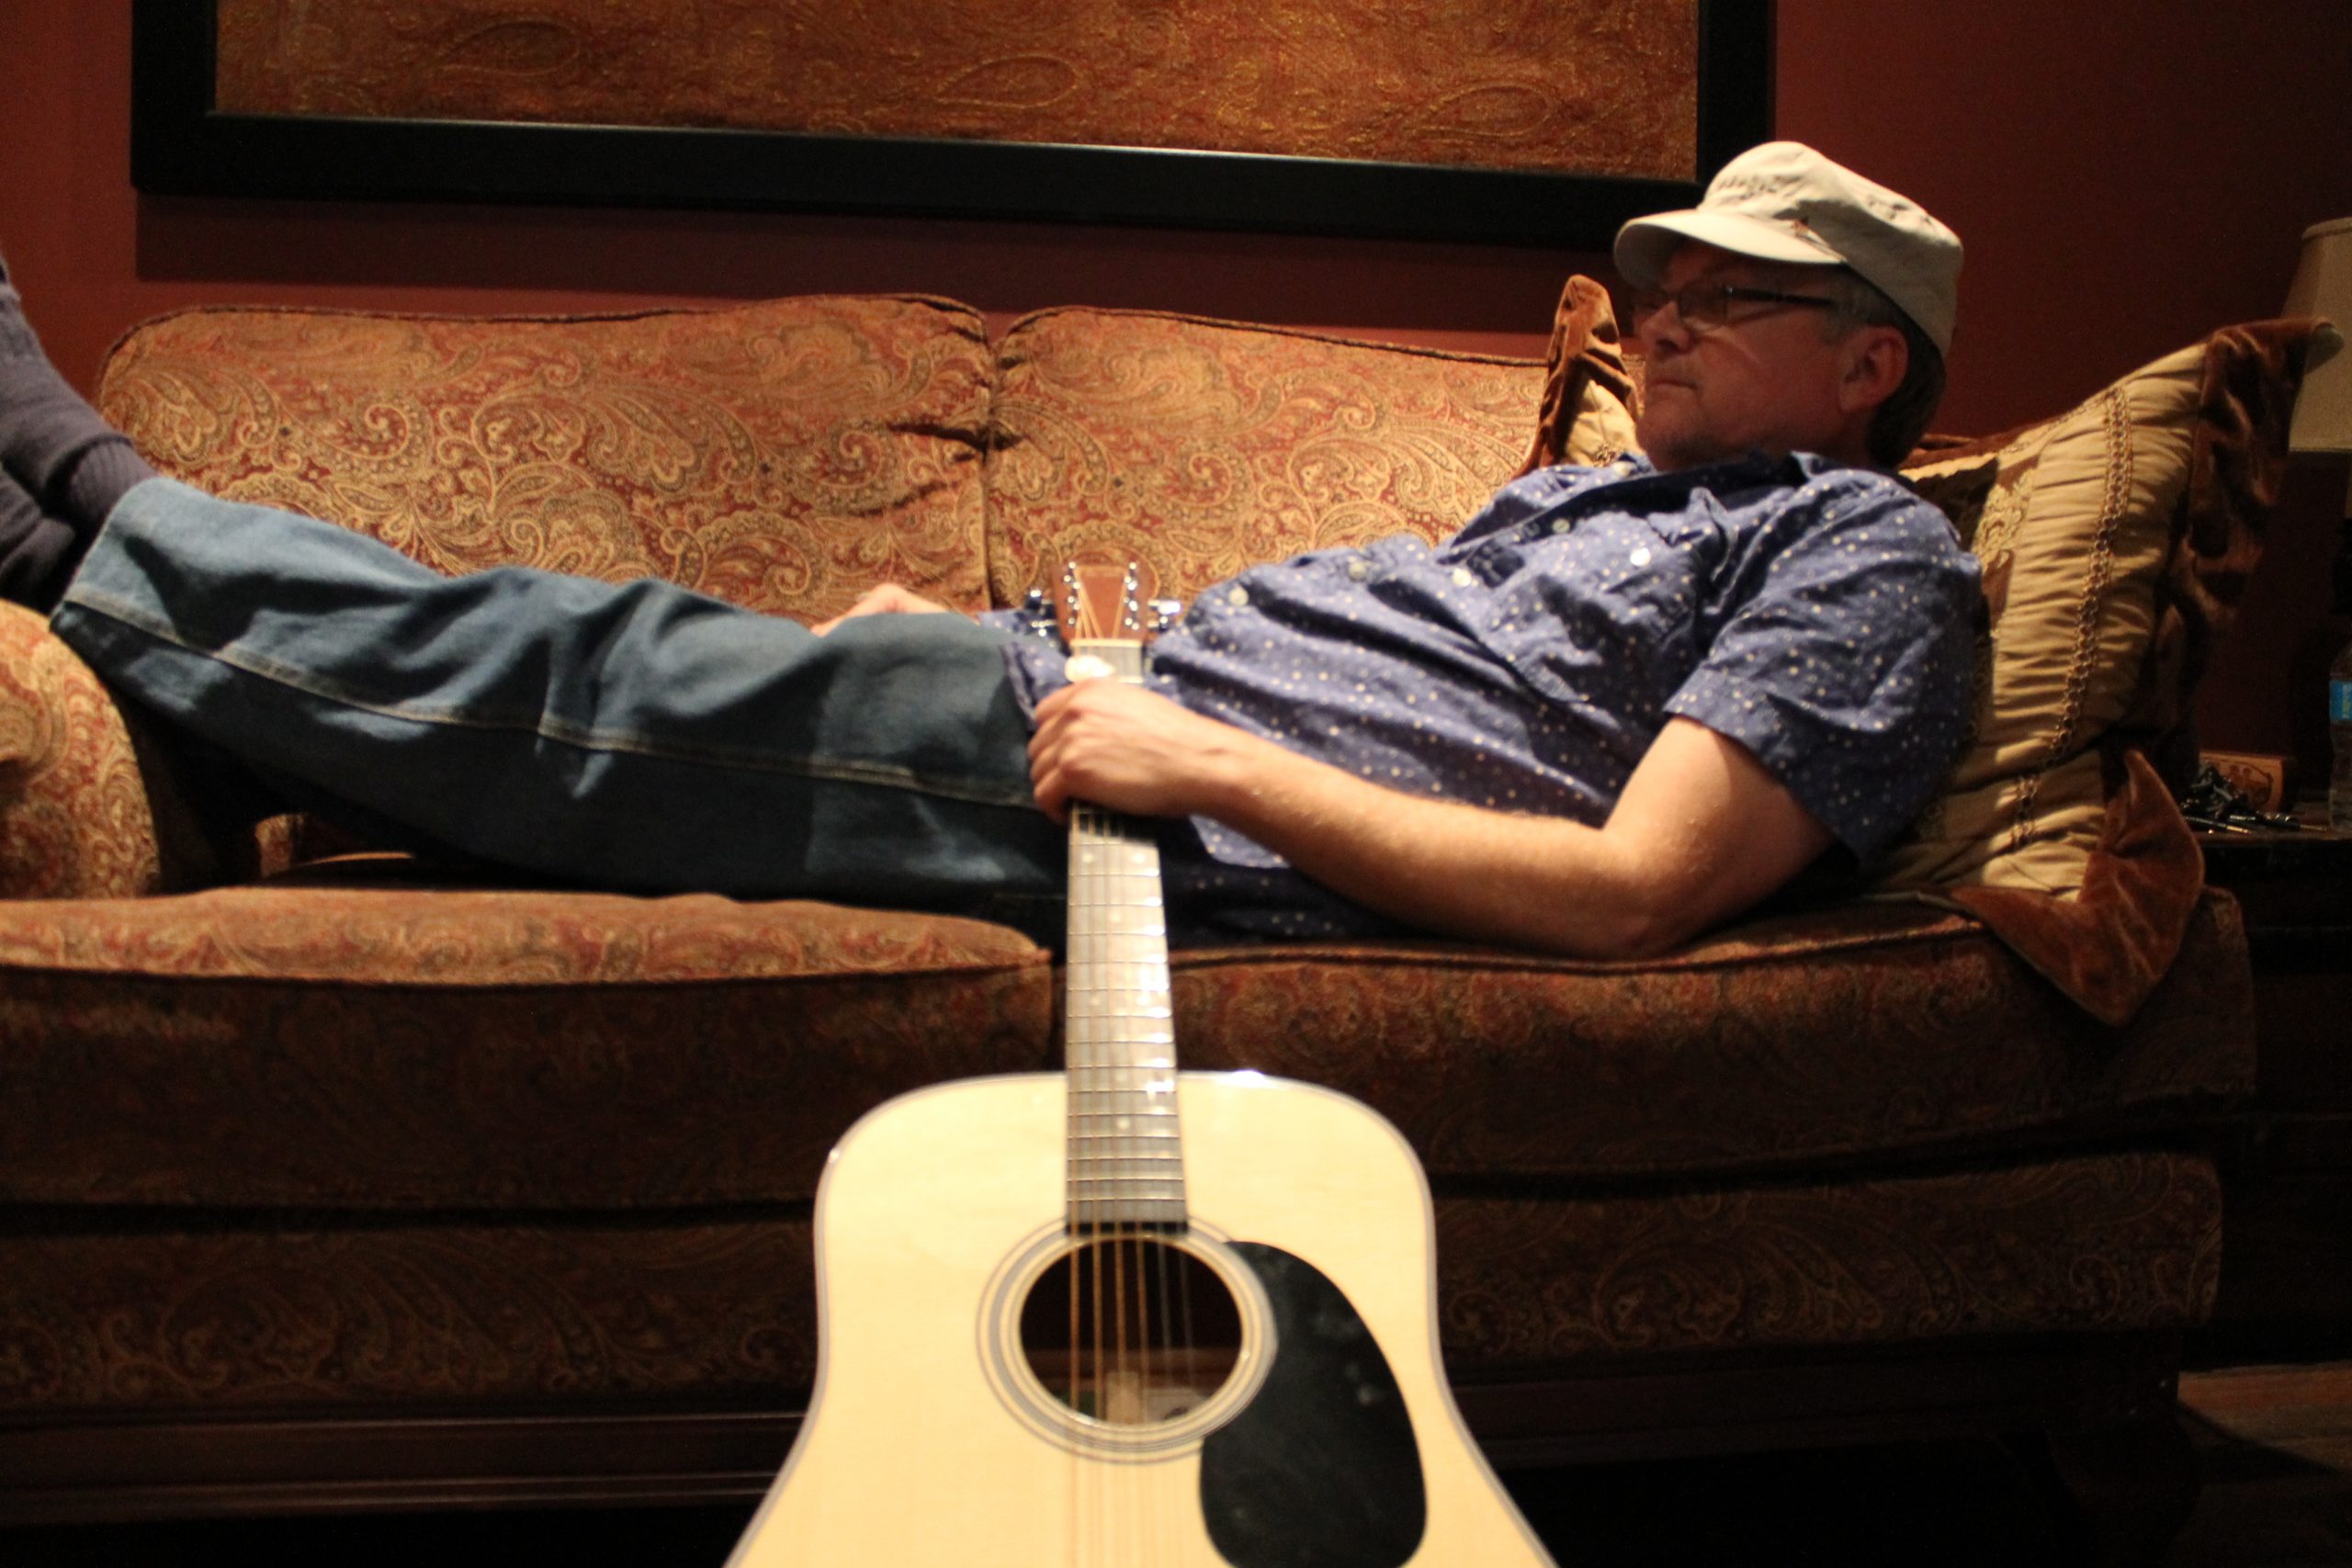 John Watson on Couch with Guitar